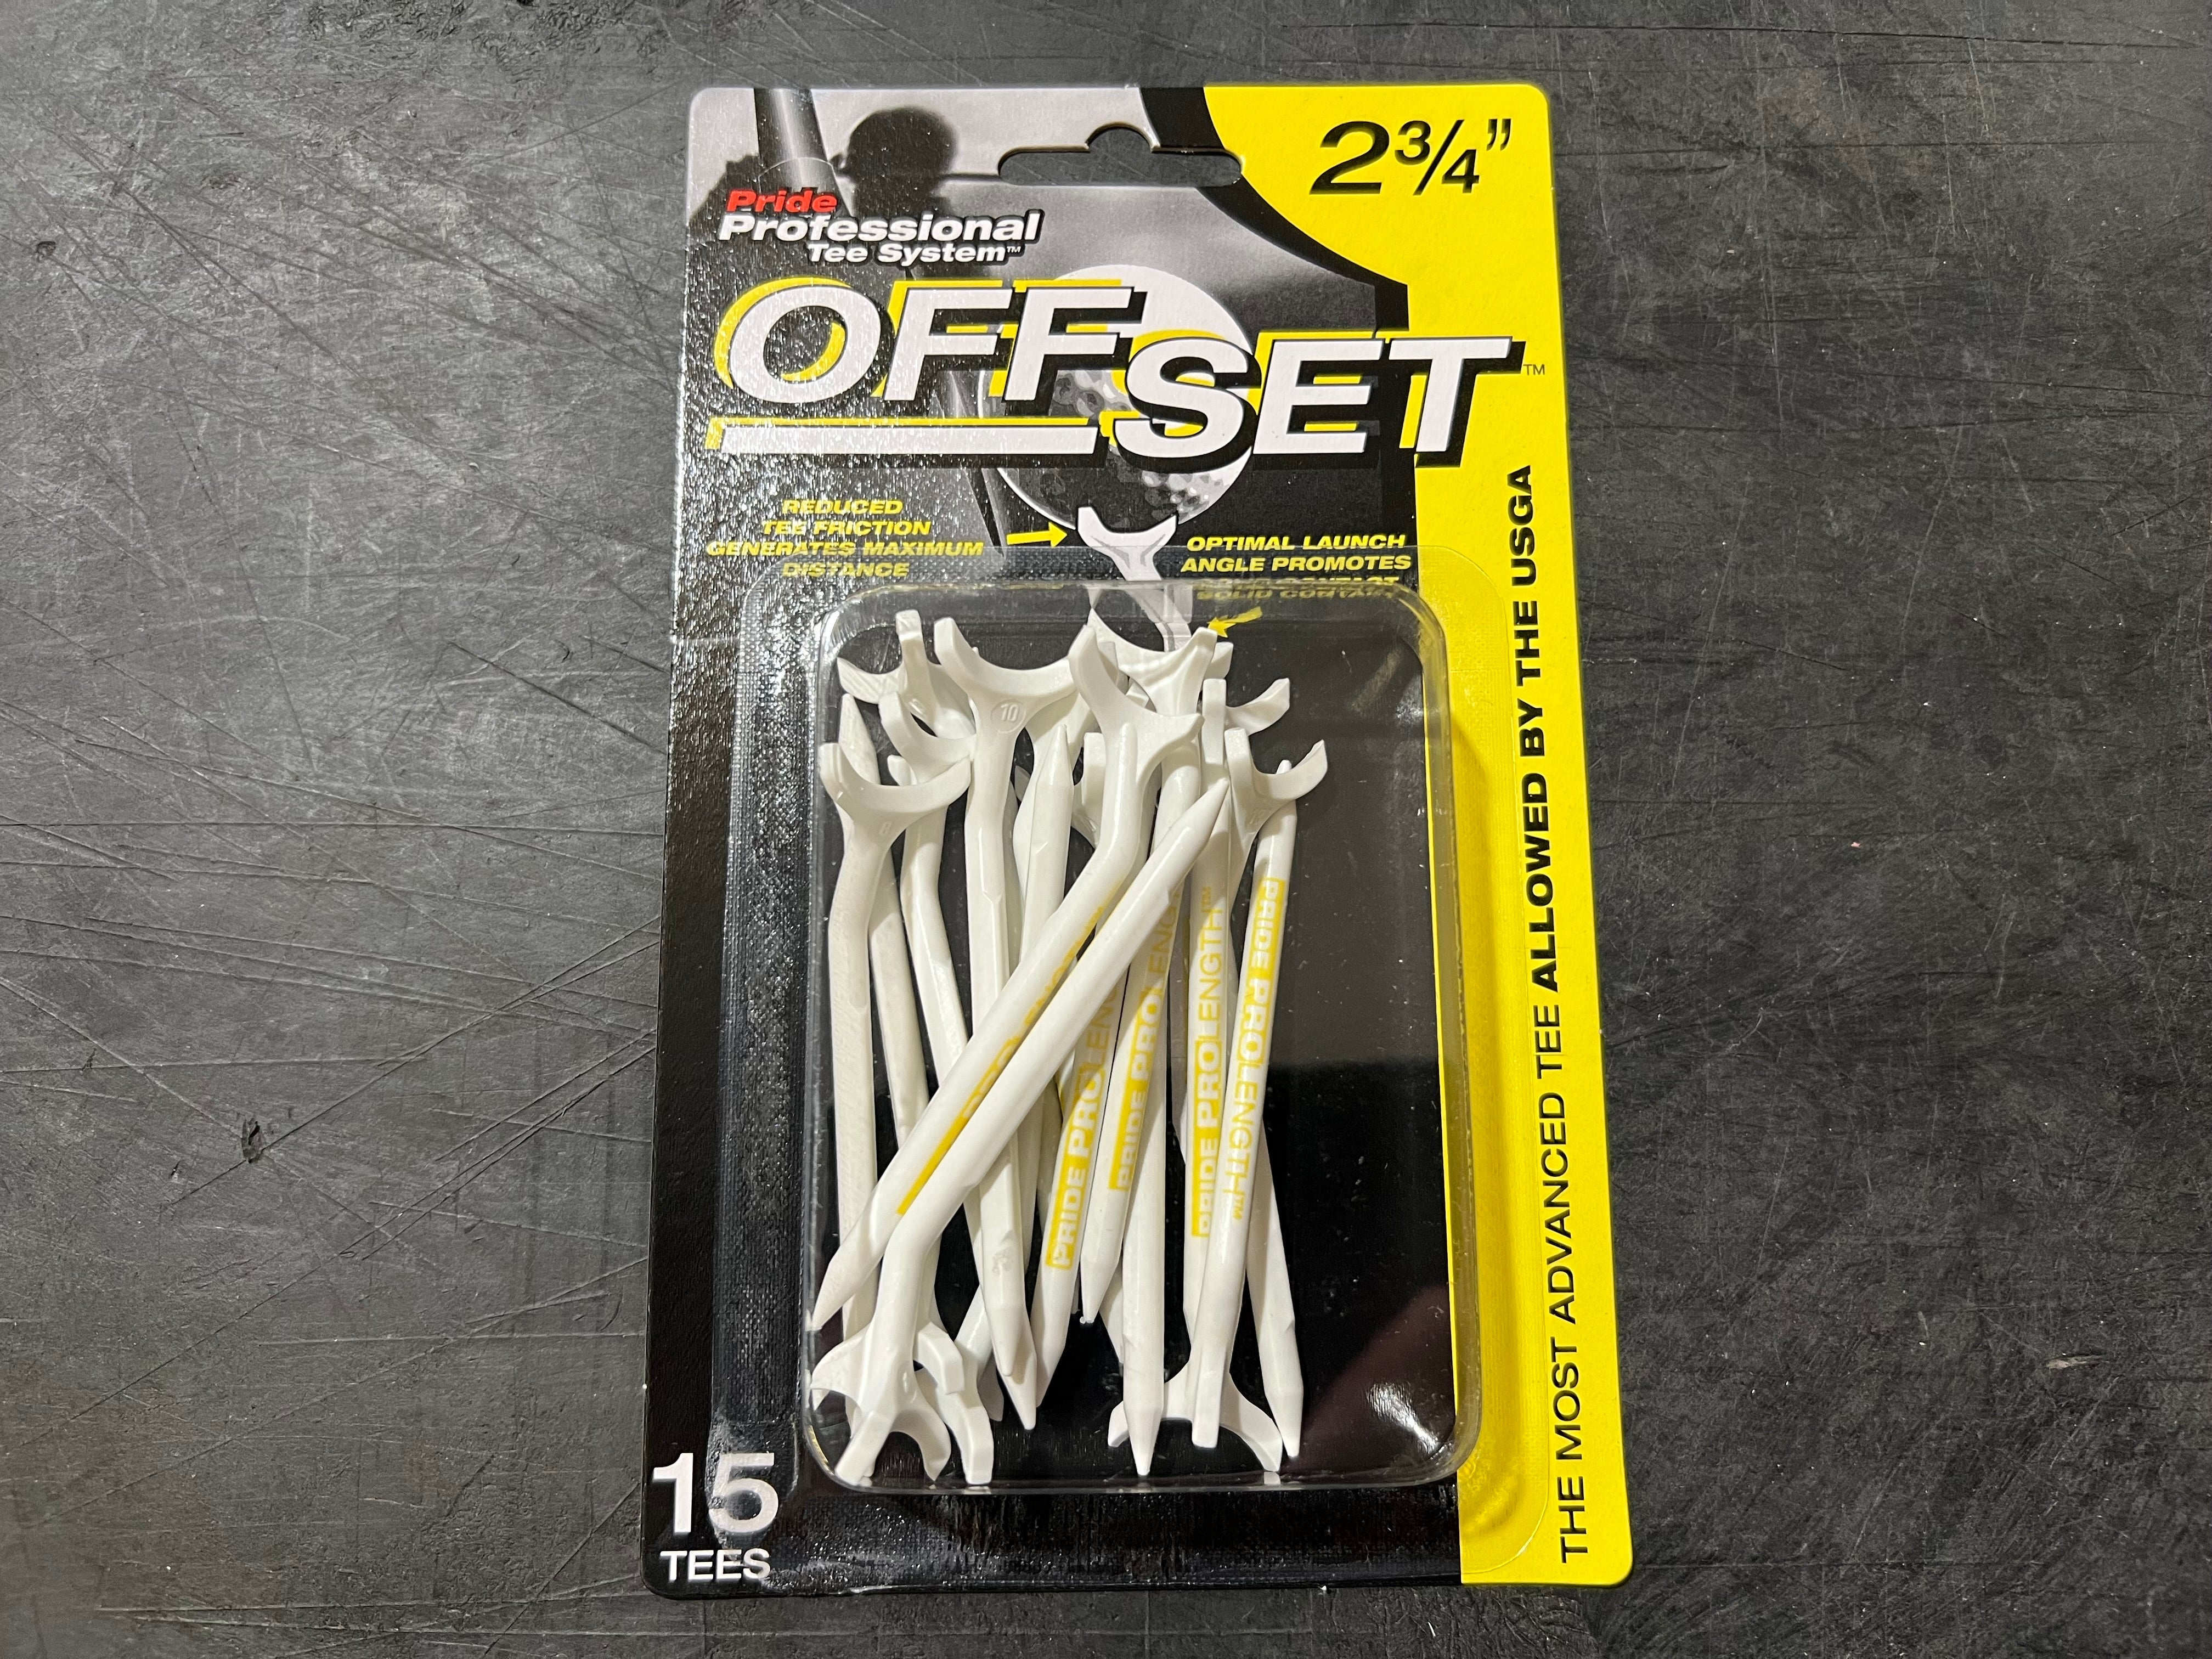 Pride Professional Tee System Offset Golf Tees